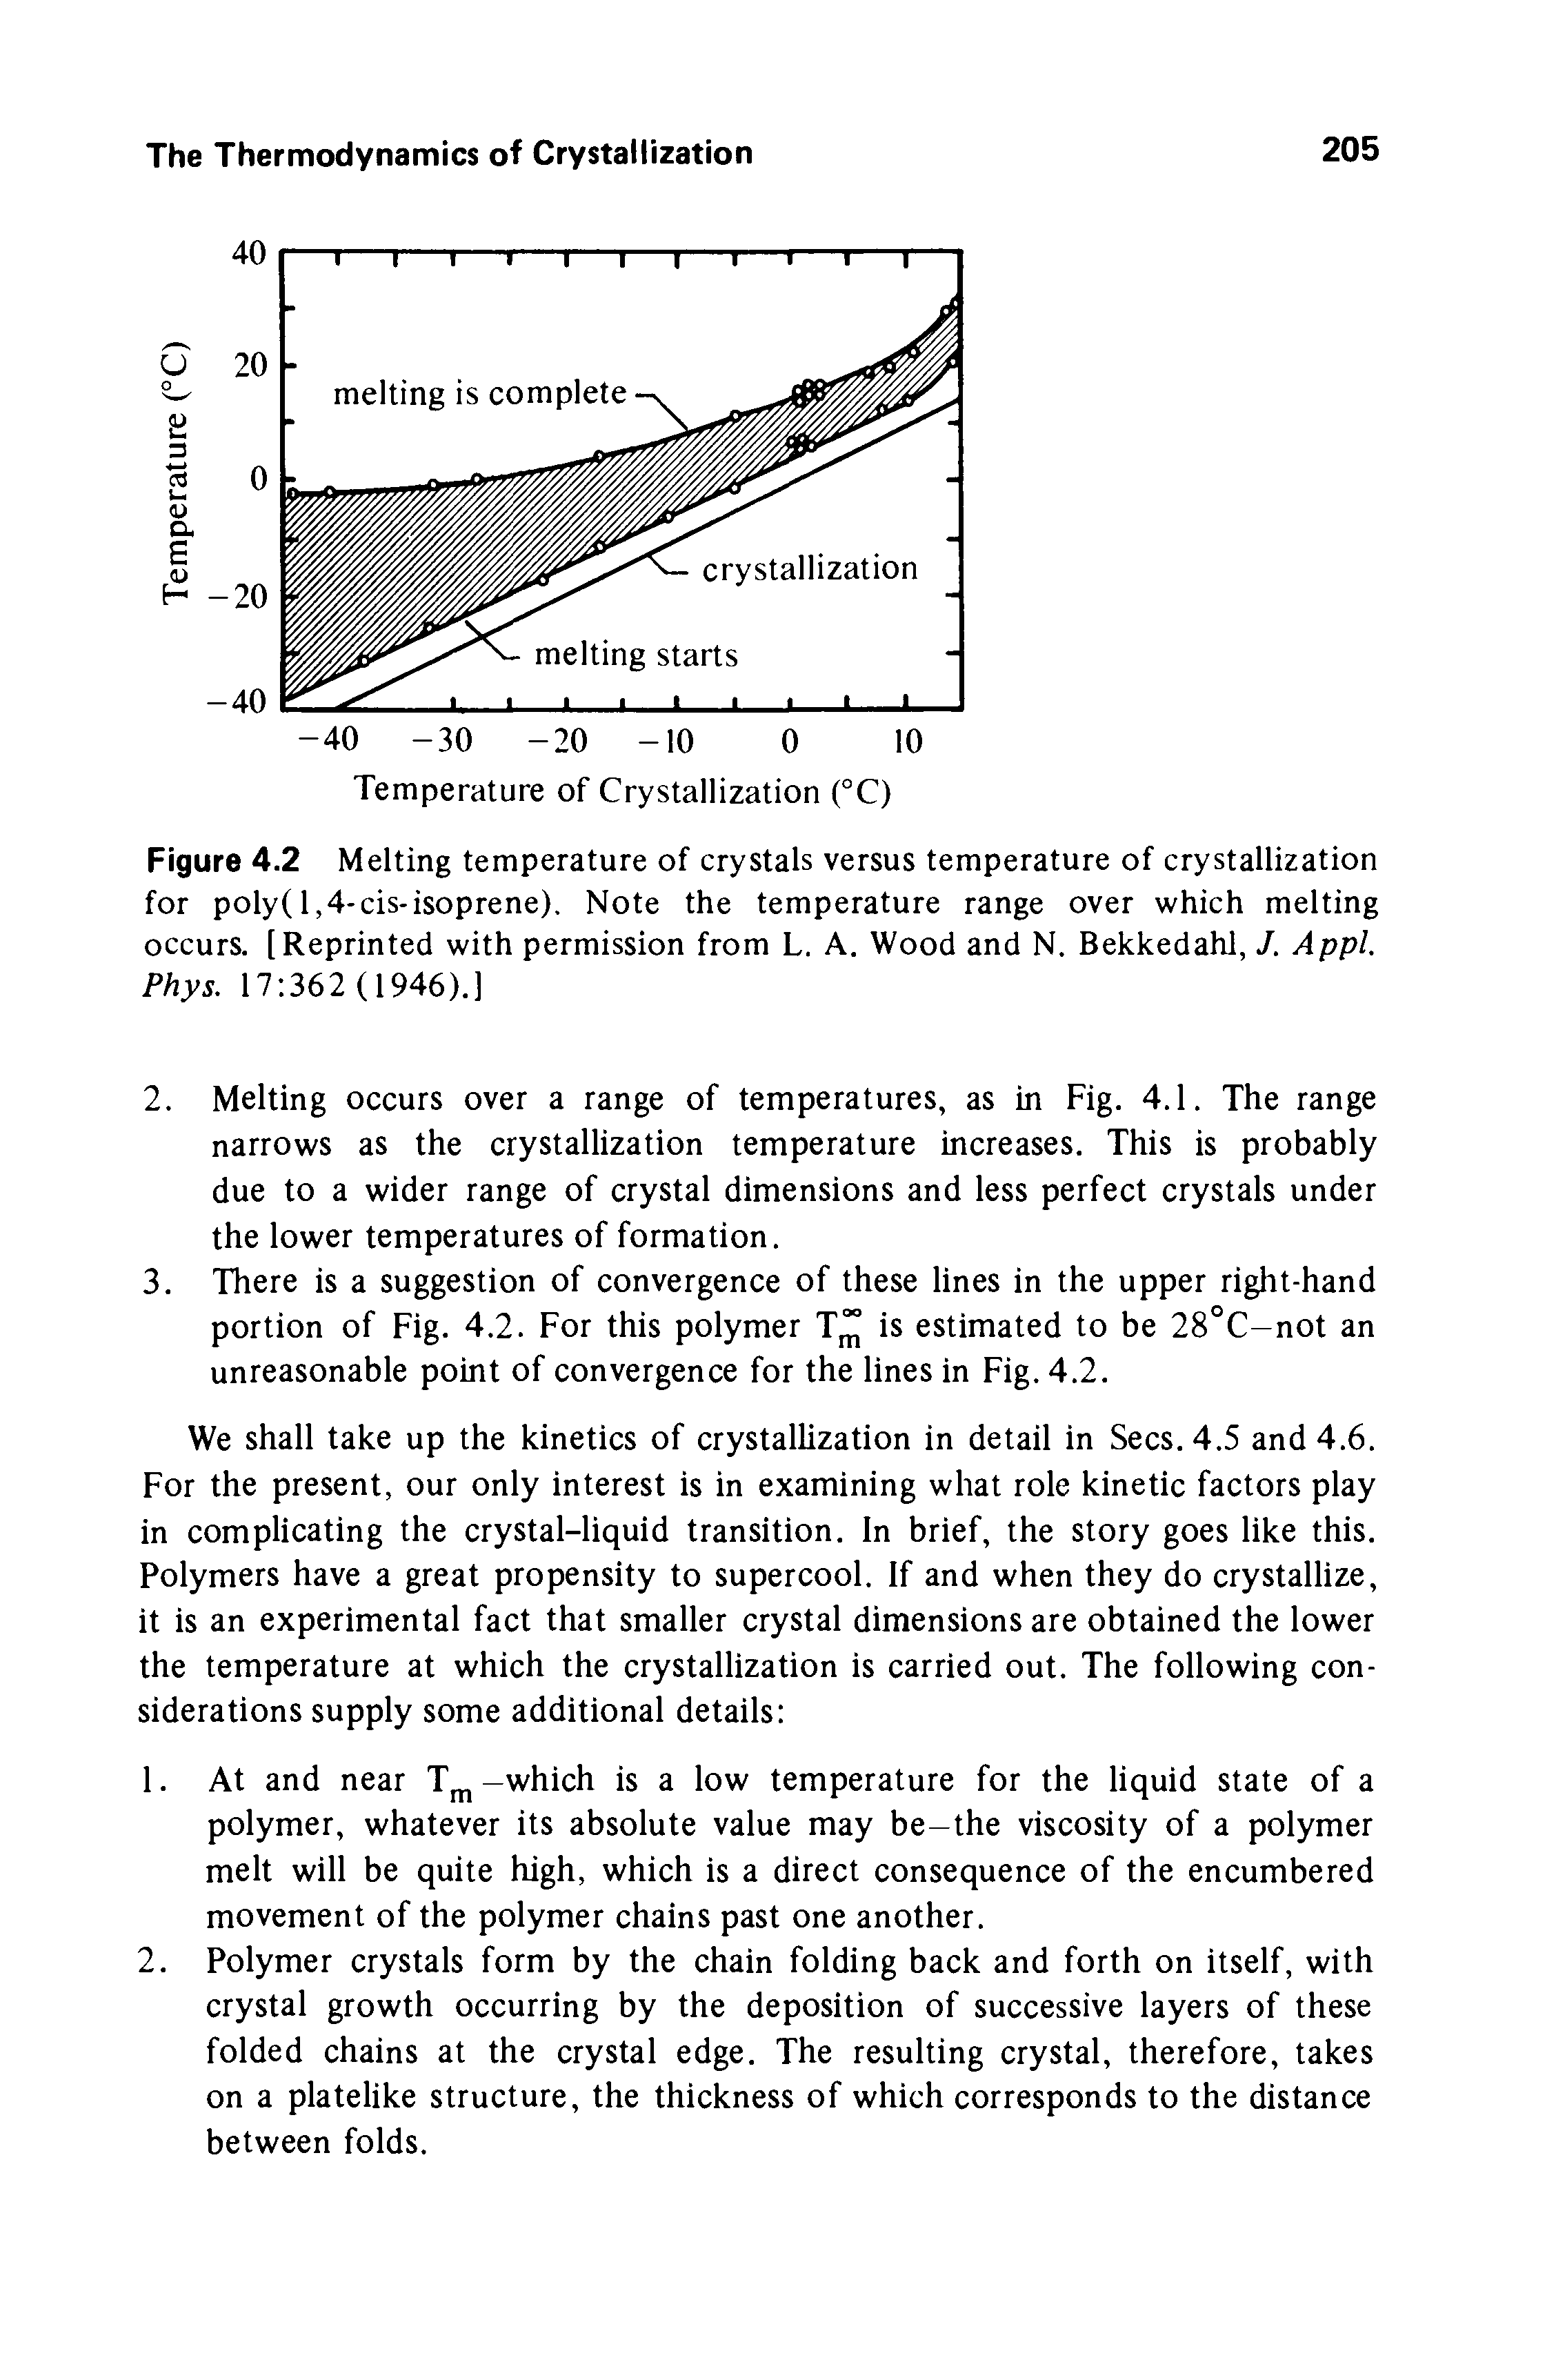 Figure 4.2 Melting temperature of crystals versus temperature of crystallization for poly( 1,4-cis-isoprene). Note the temperature range over which melting occurs. [Reprinted with permission from L. A. Wood and N. Bekkedahl, J. Appl. Phys. 17 362 (1946).]...